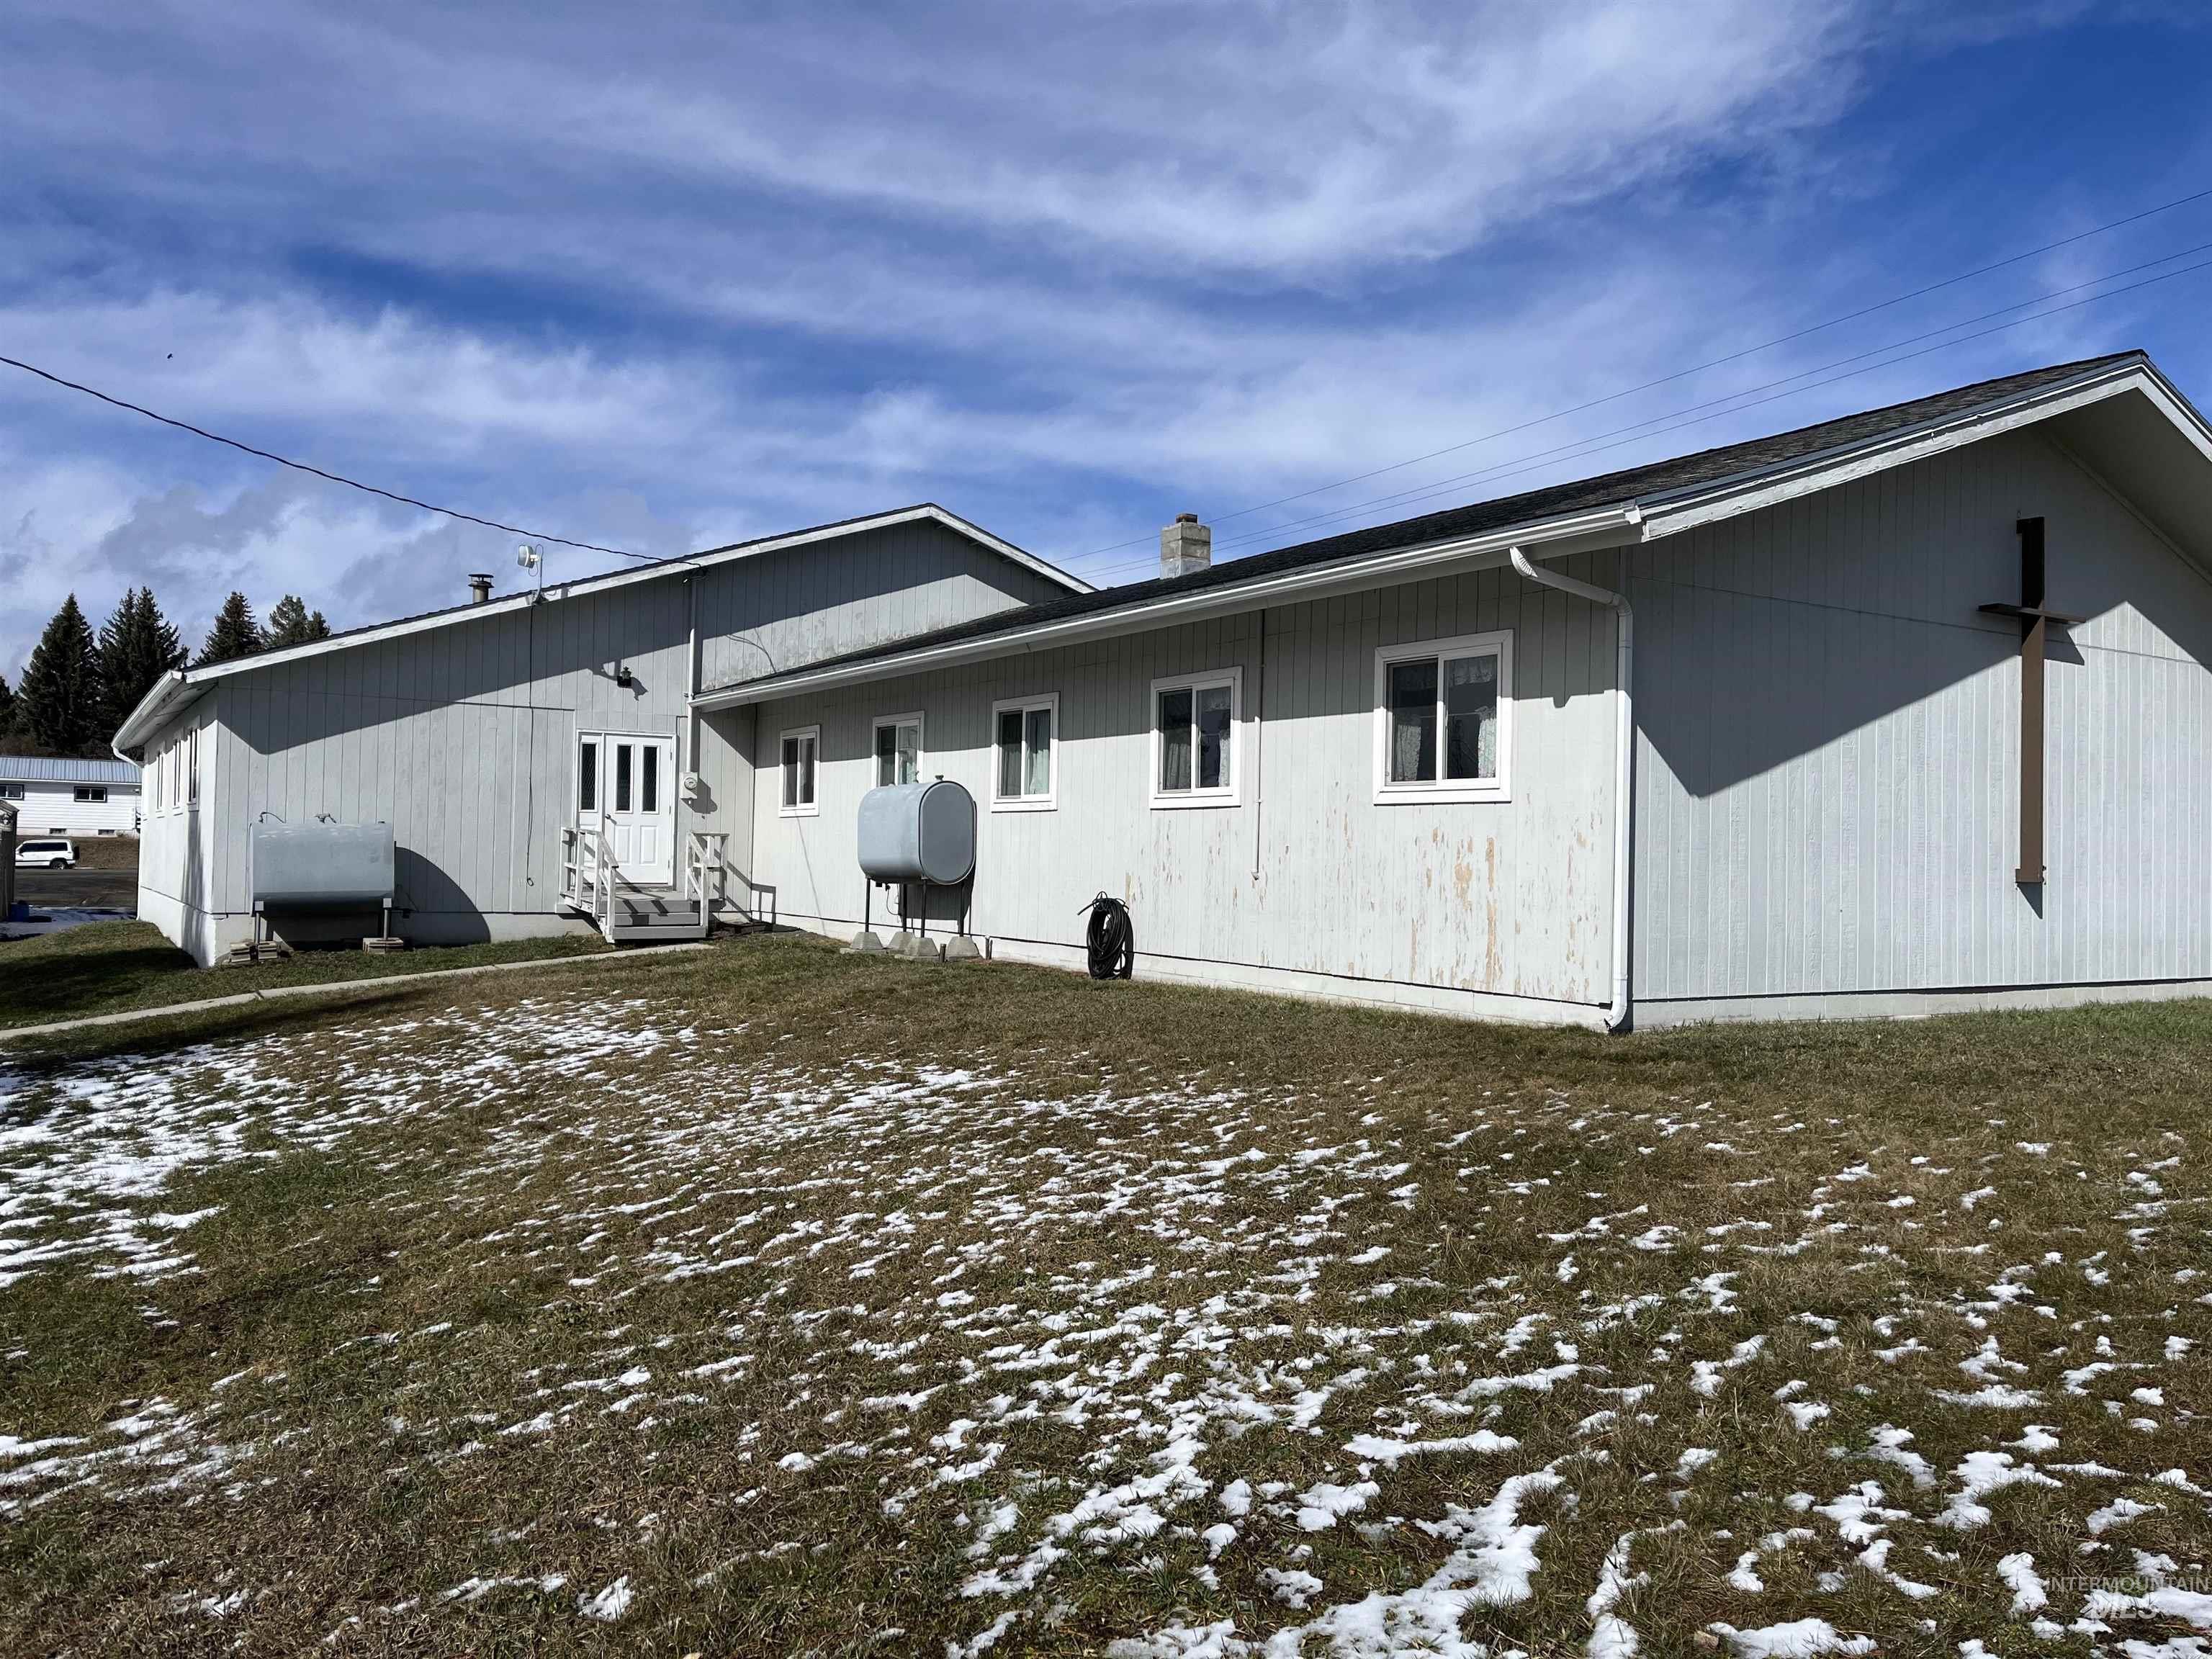 520 E Main St, Craigmont, Idaho 83523, Business/Commercial For Sale, Price $385,000,MLS 98902148